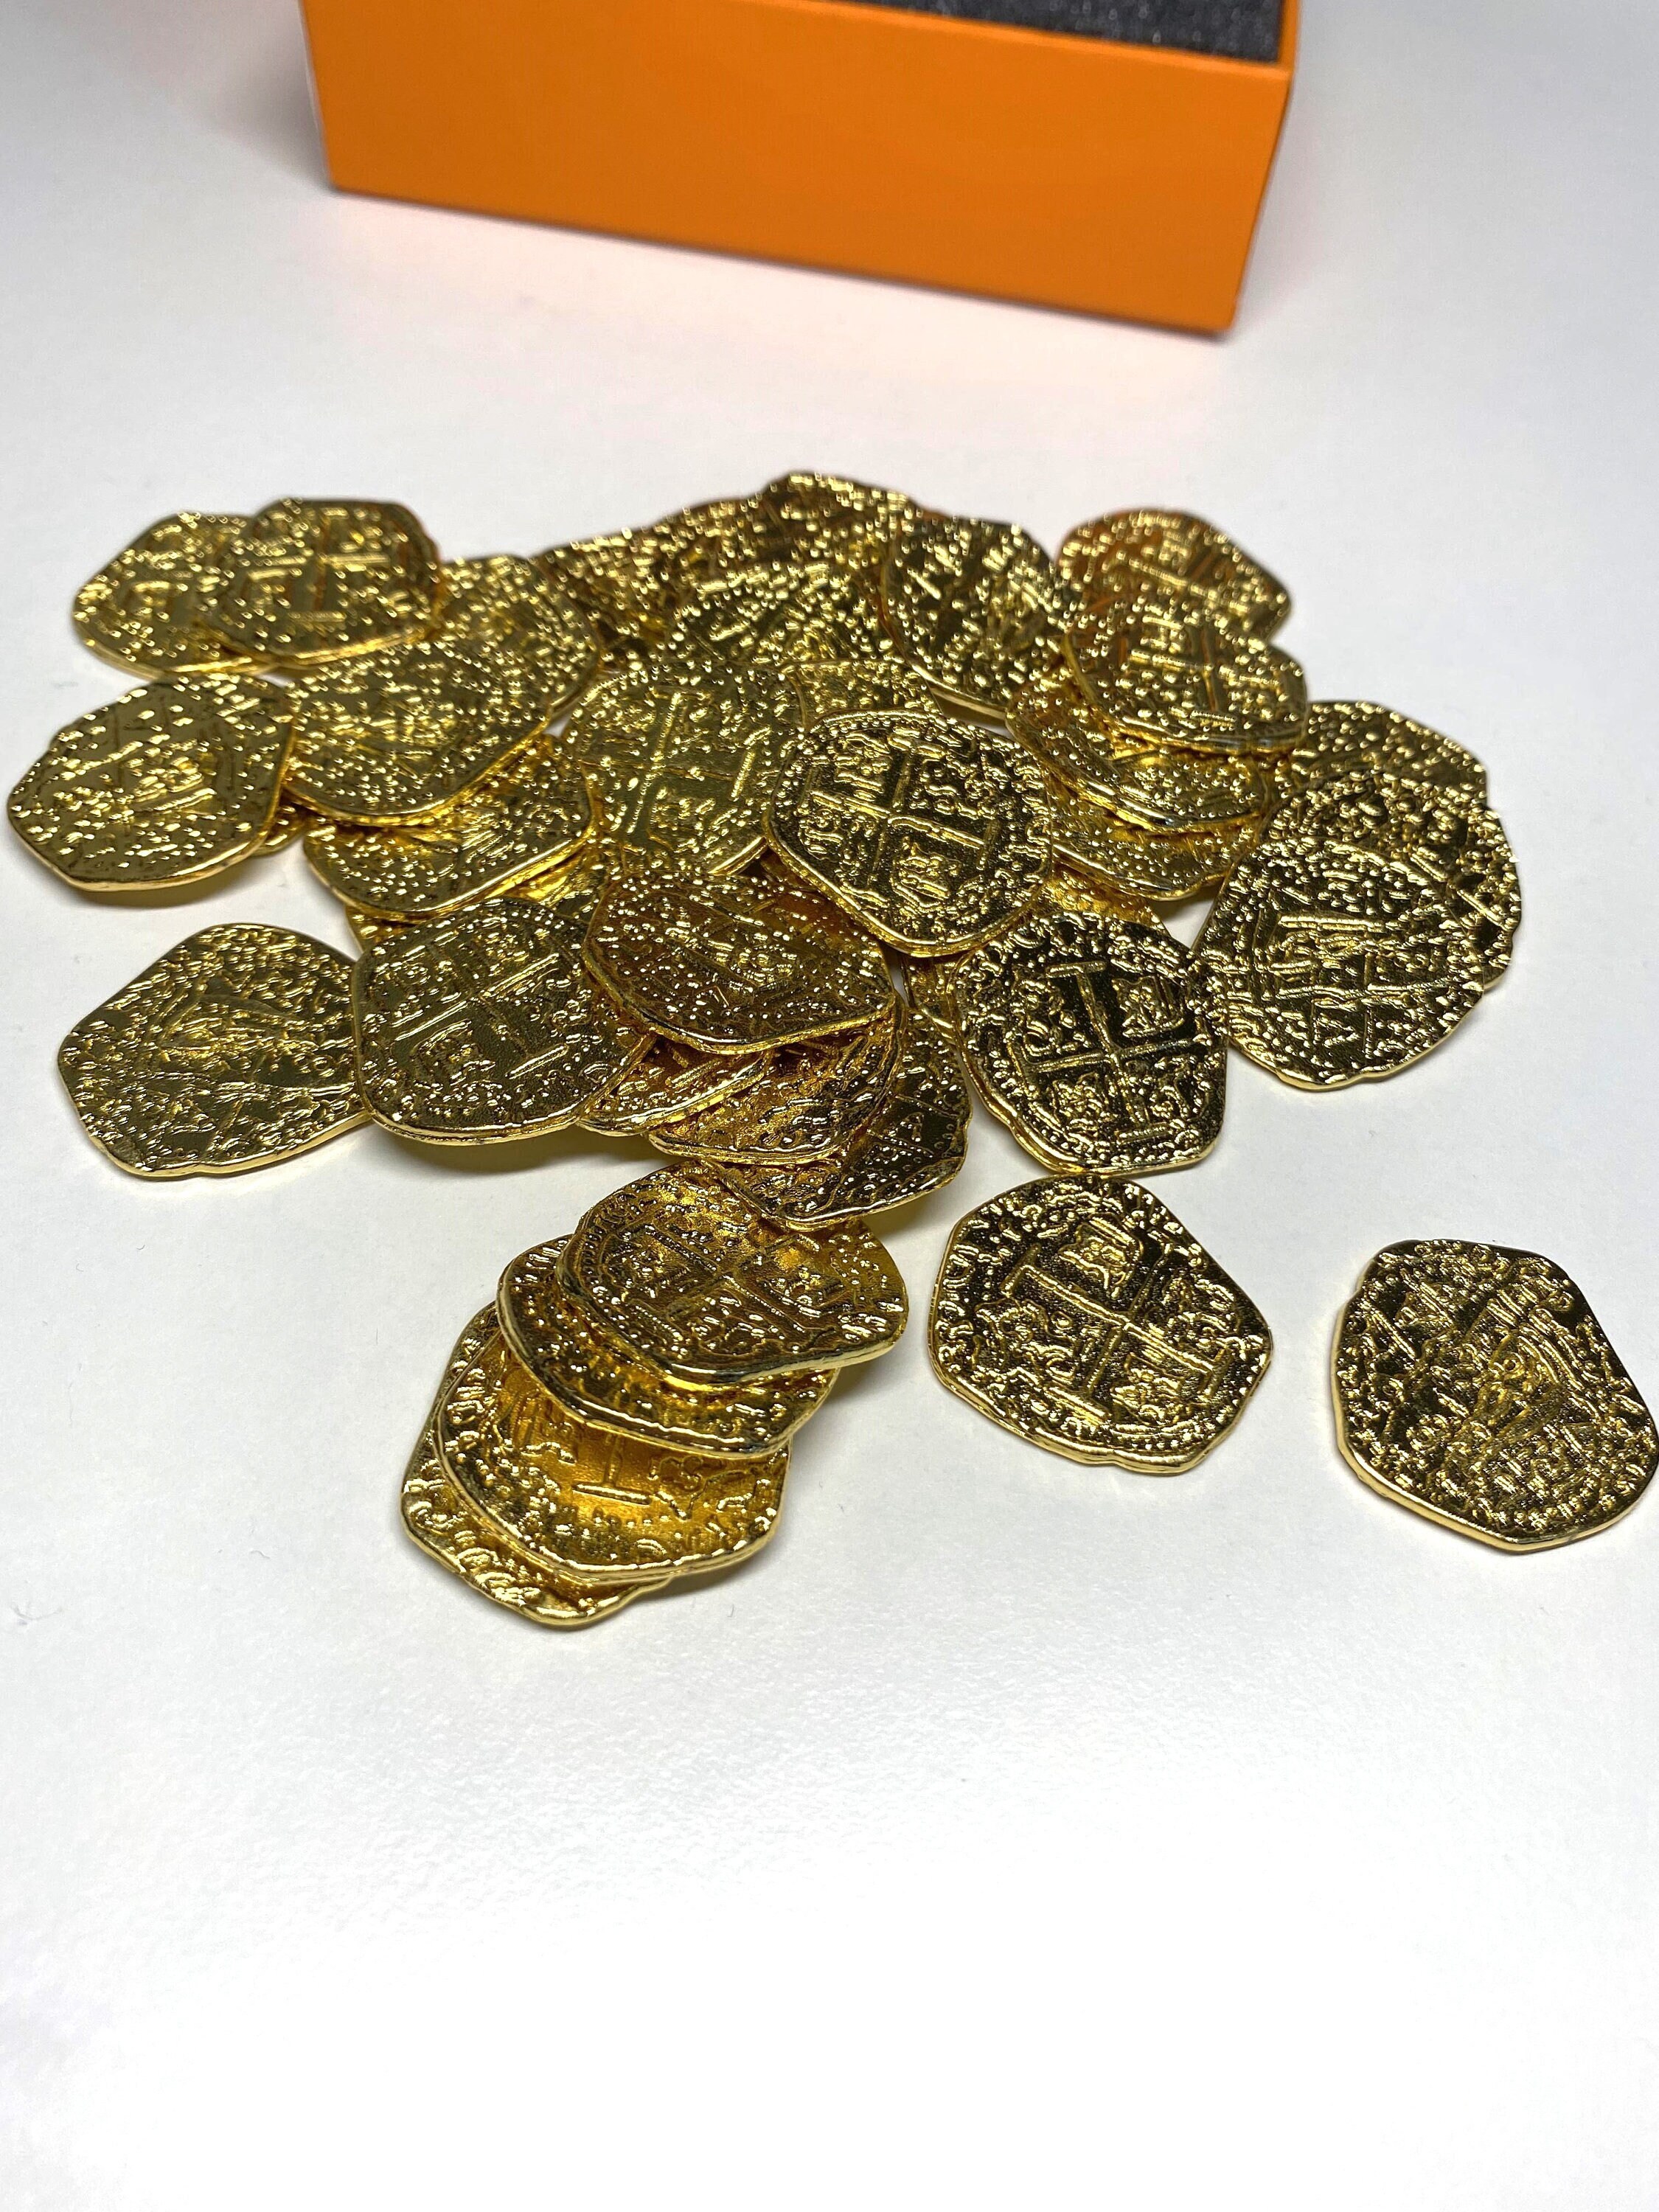 Florin metal coins for gaming